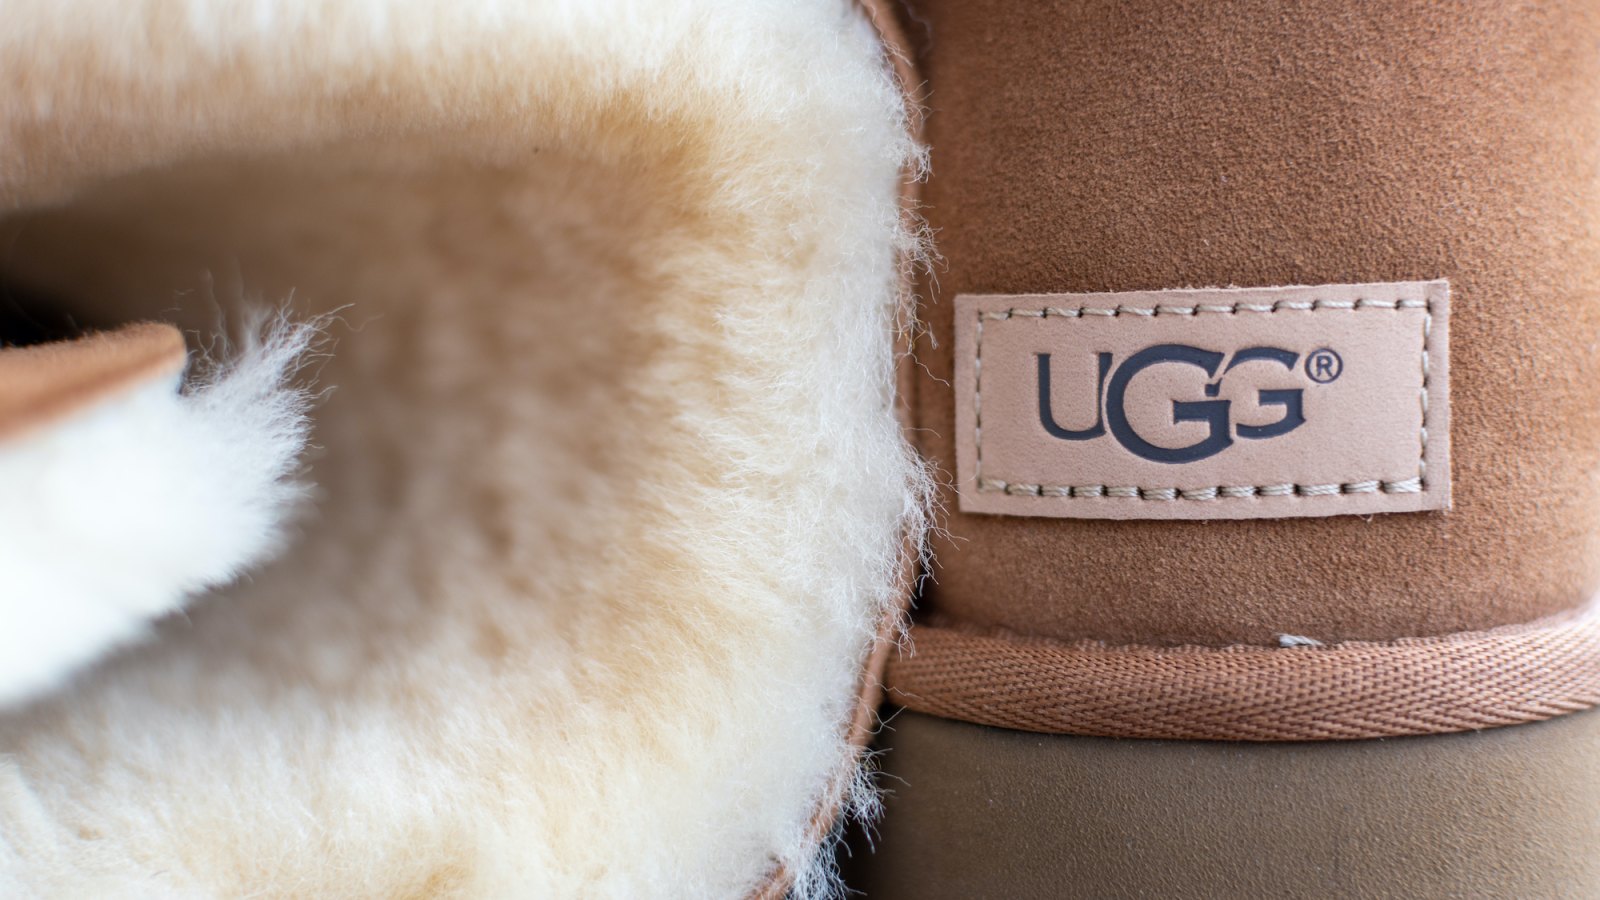 Vermelding toespraak koken UGG Boots Are Still on Sale for Black Friday Prices at Zappos